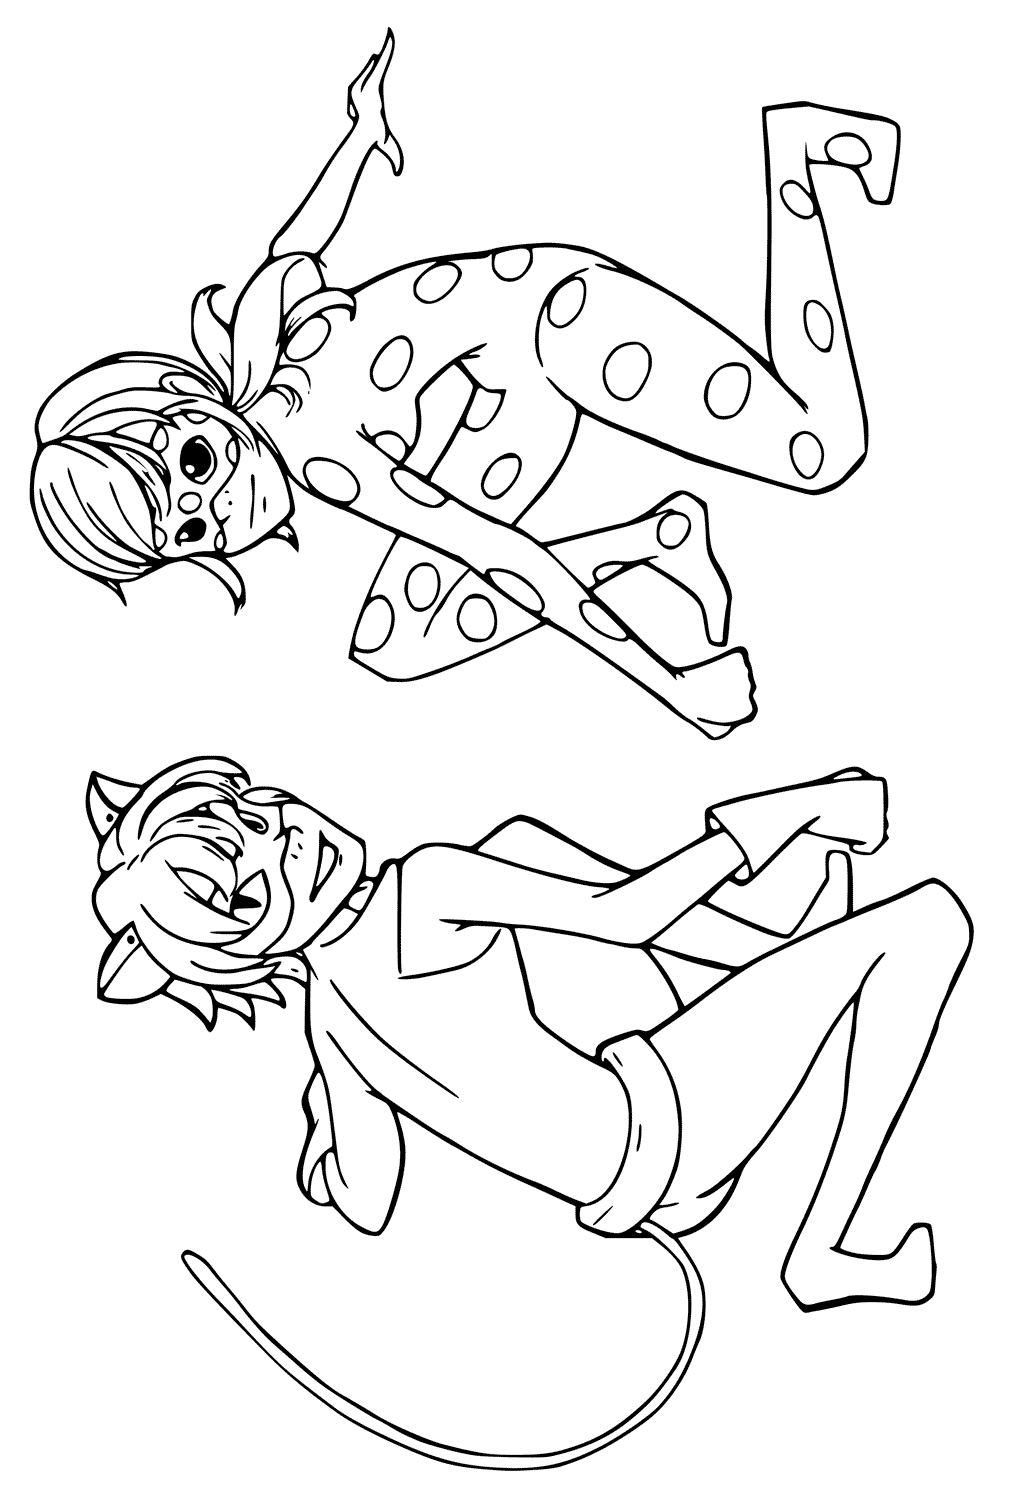 Ladybug And Cat Noir Coloring Pages Coloring Pages